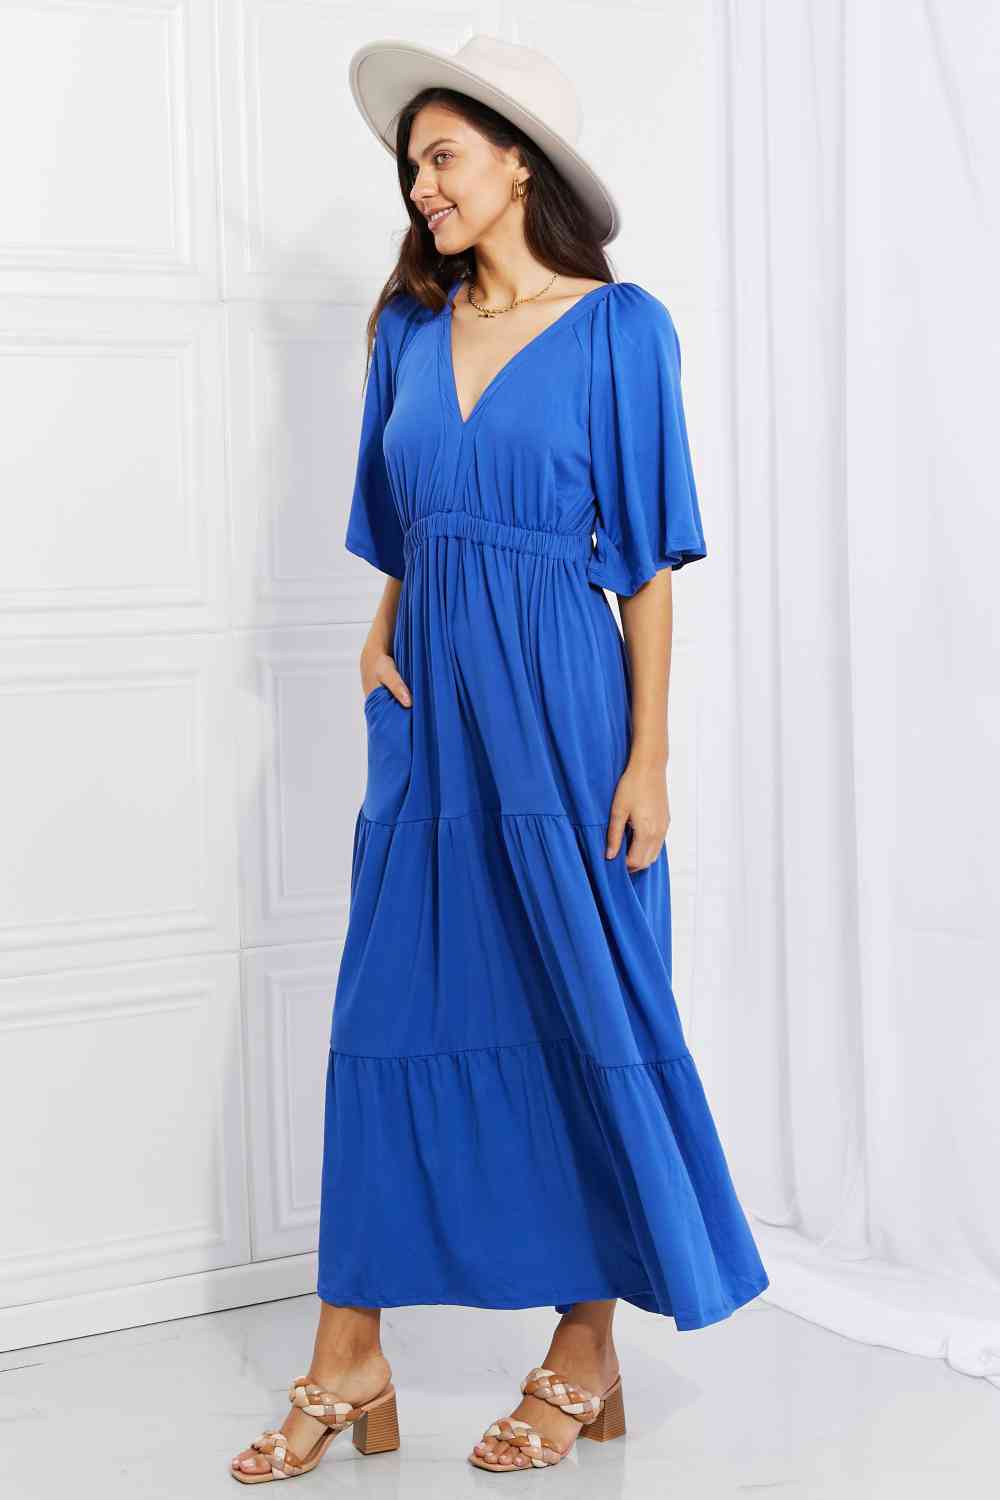 My Muse Flare Sleeve Tiered Maxi Dress - All Dresses - Dresses - 4 - 2024